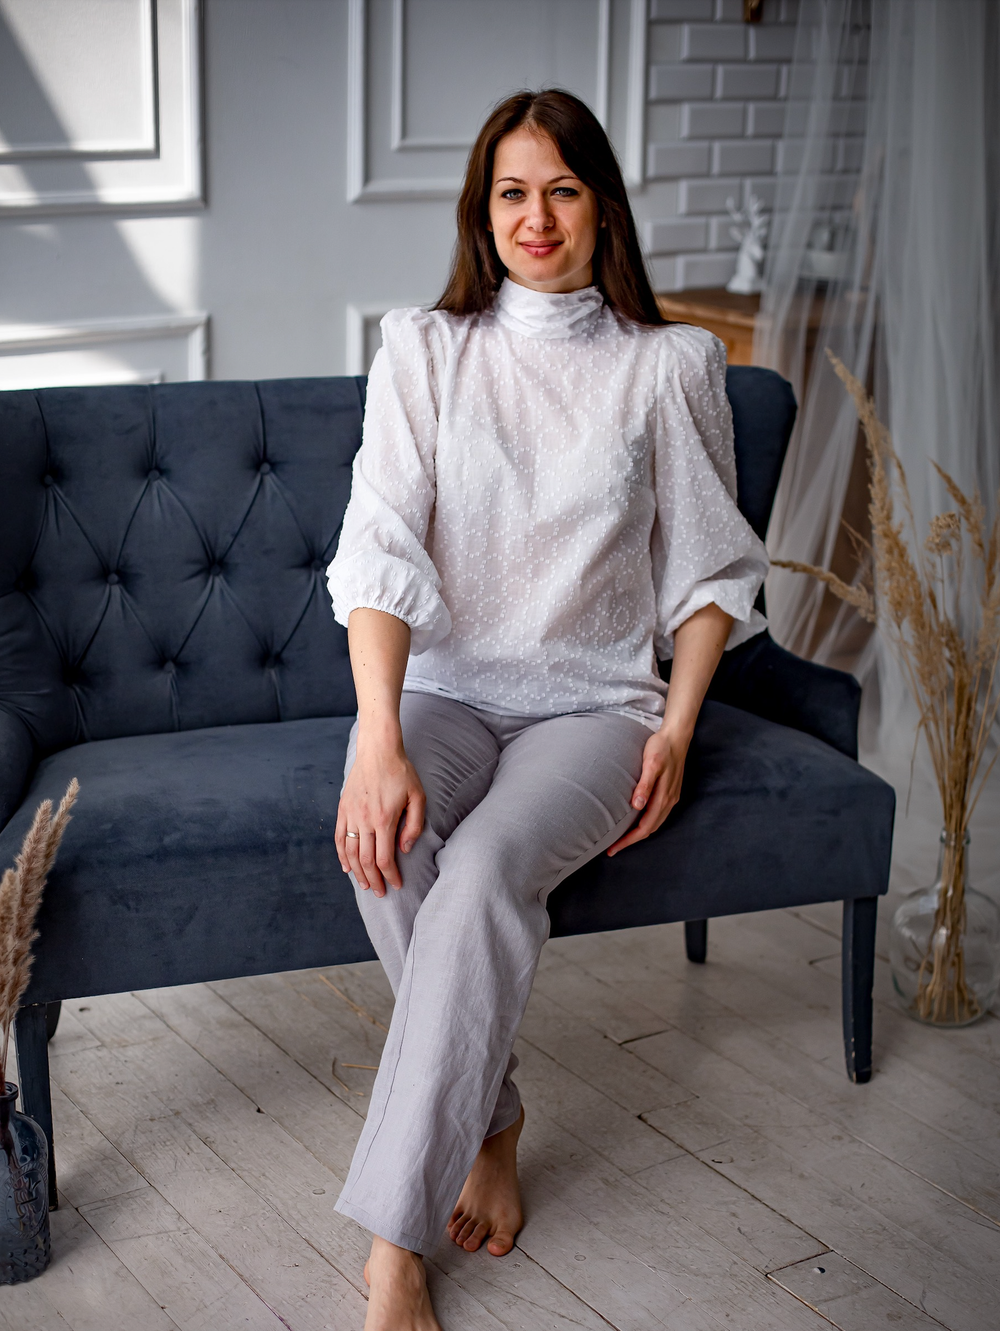 Woman wearing the Carrie Blouse sewing pattern from Kates Sewing Patterns on The Fold Line. A blouse pattern made in silk, linen or cotton fabrics, featuring bust darts, voluminous sleeves with elasticated cuffs and high collar which becomes a bow that ti